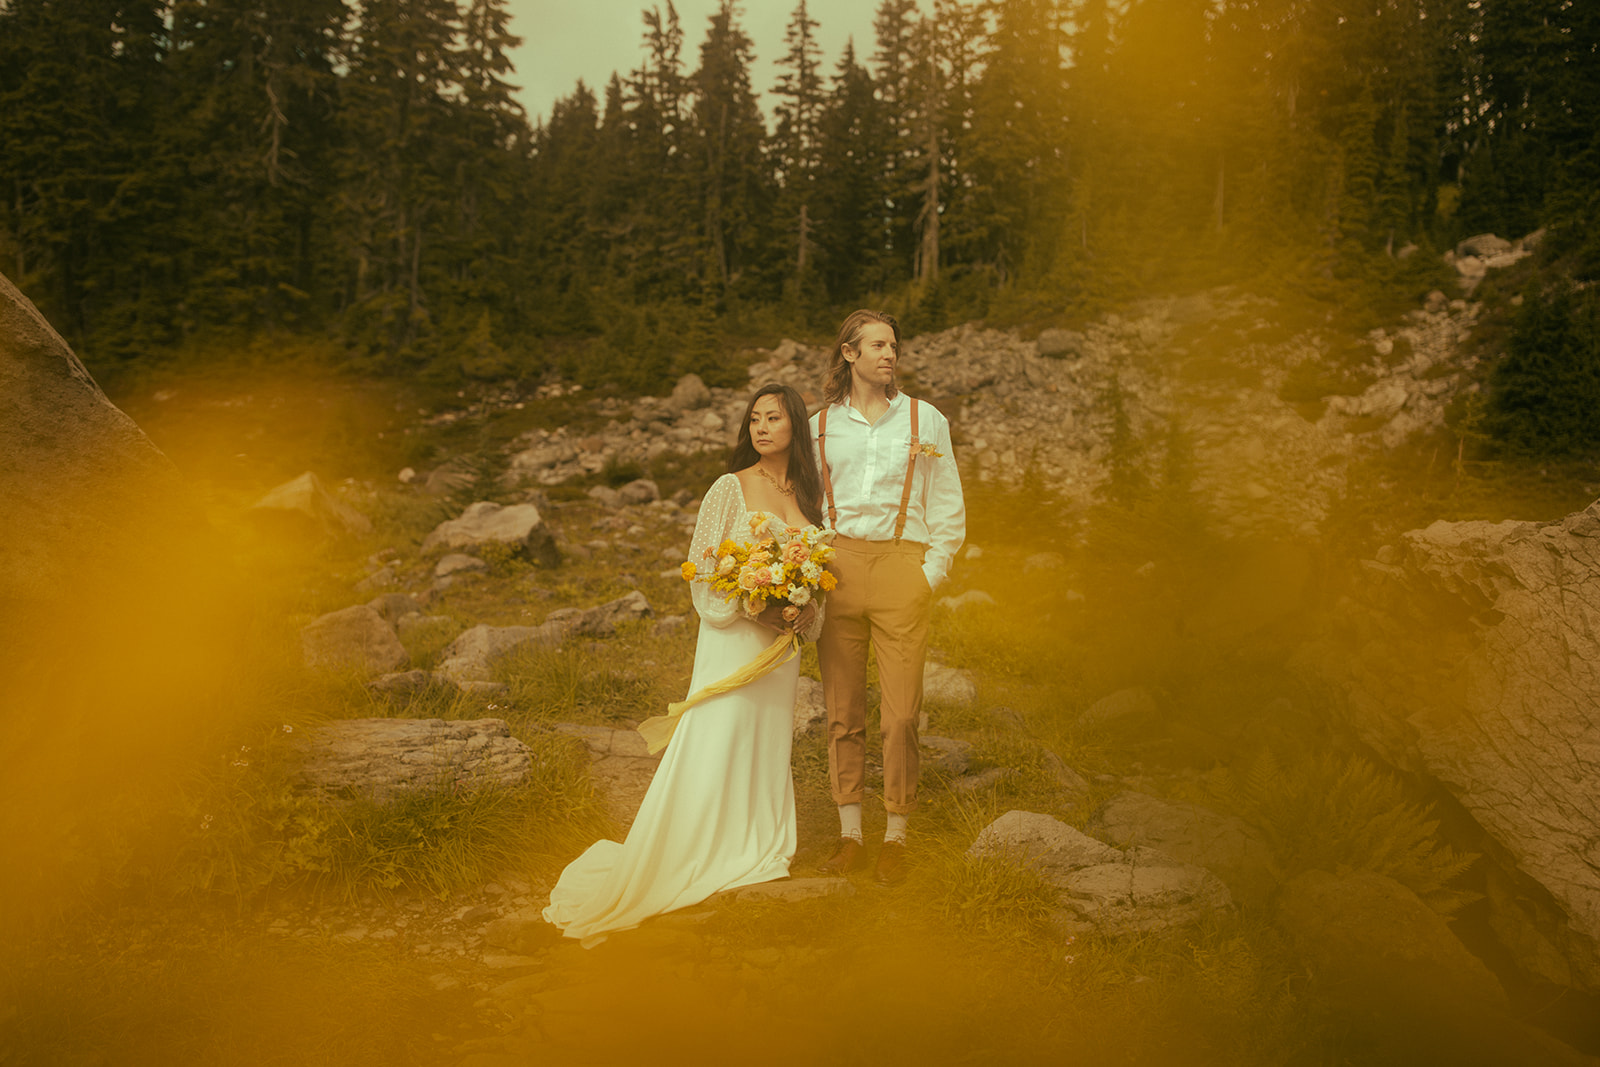 A bride and groom gaze out into the open with a rocky, forest landscape behind them during their spring elopement.